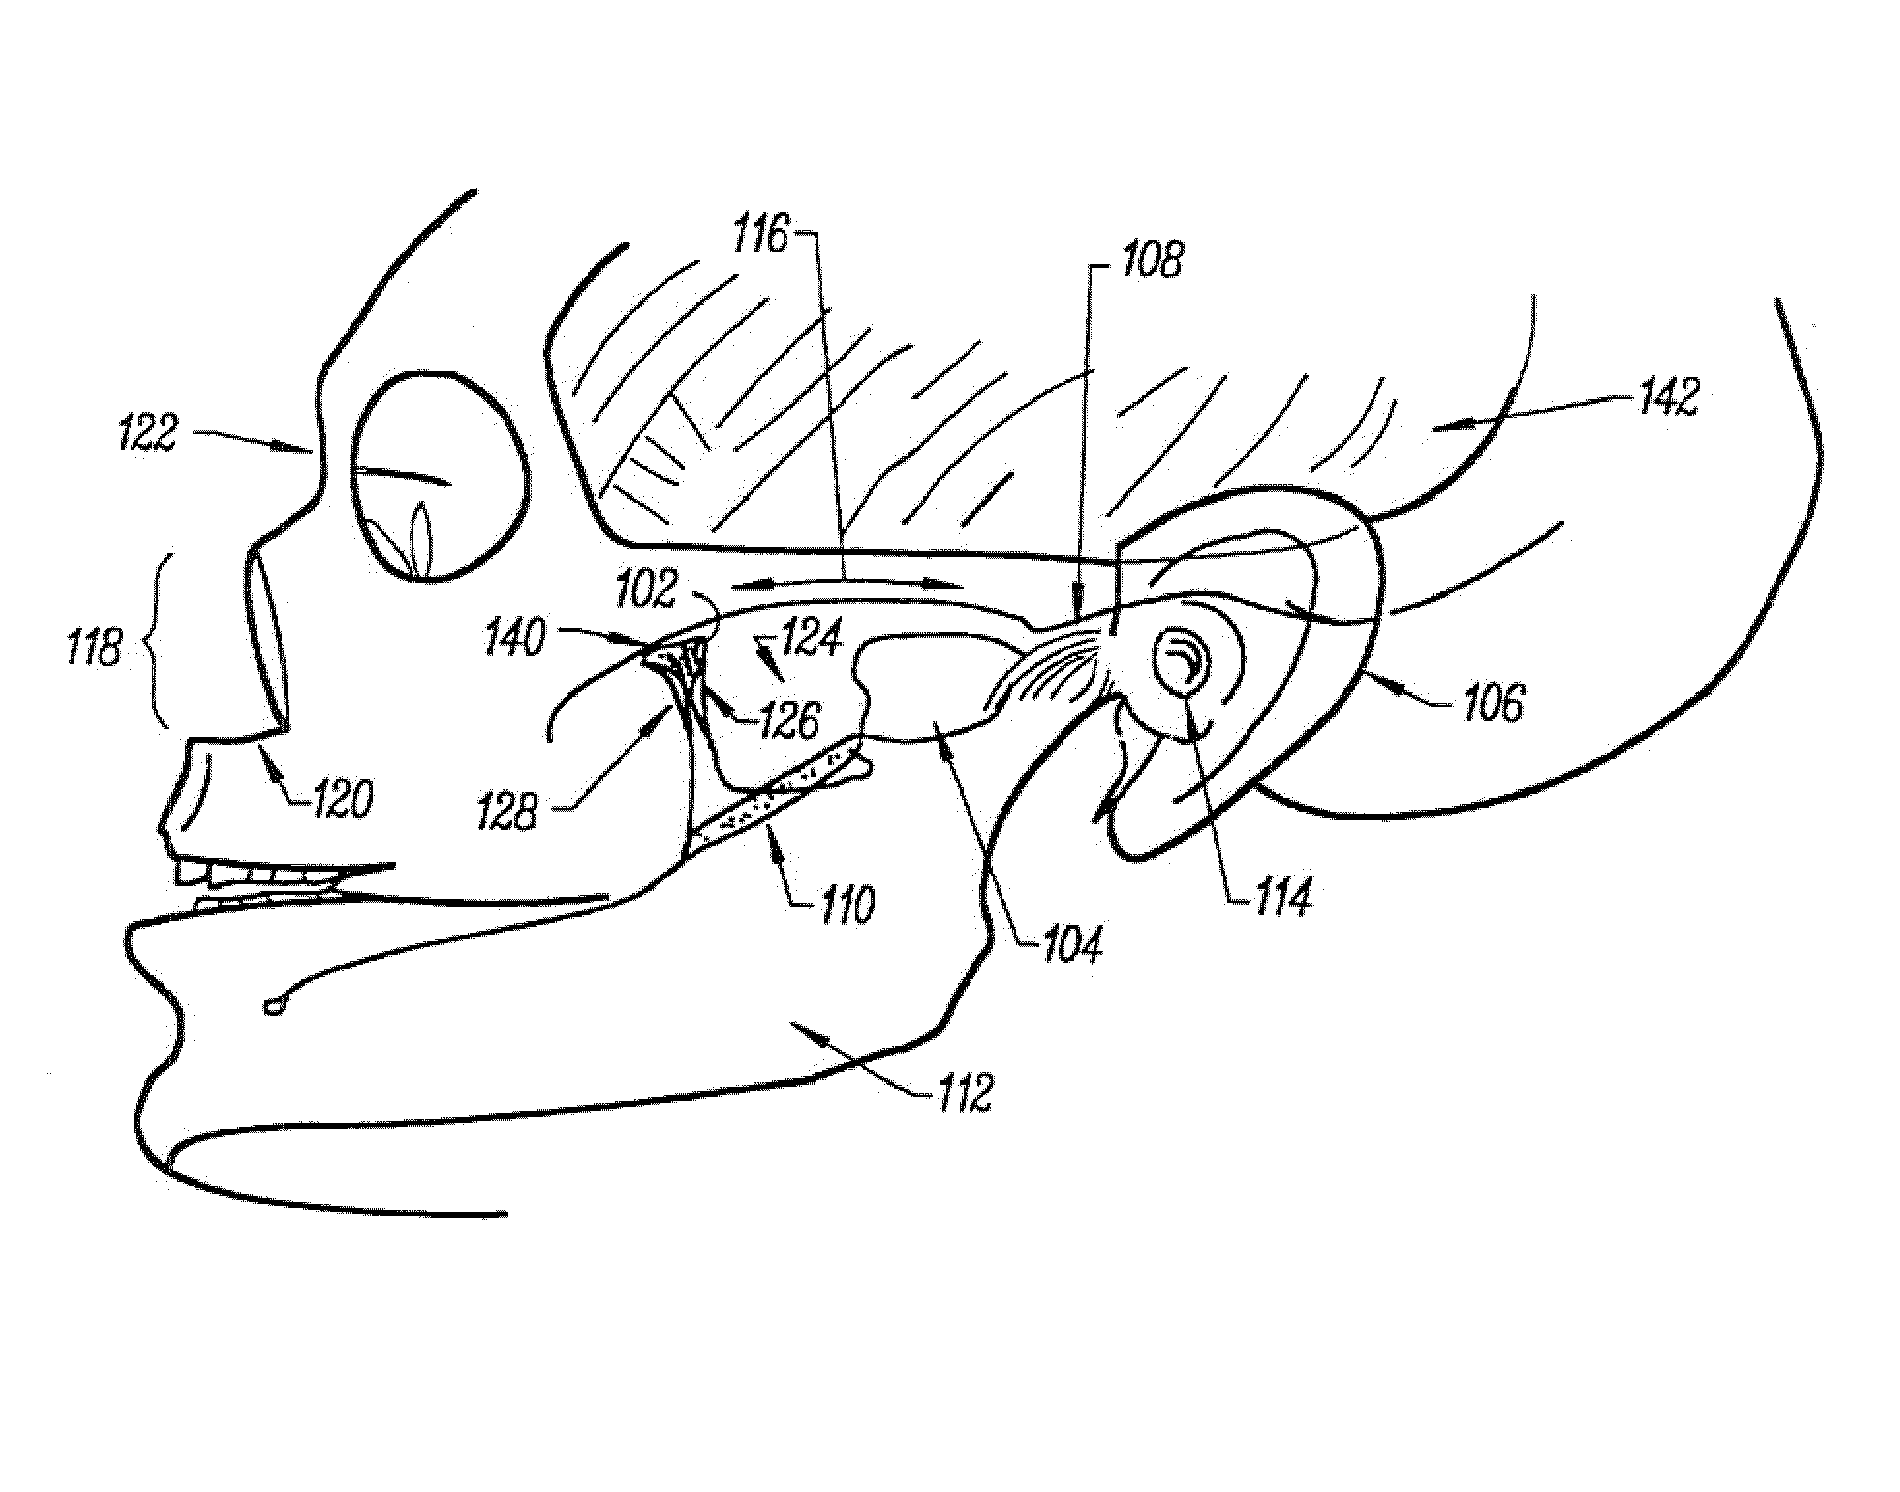 Stimulation method for the sphenopalatine ganglia, sphenopalatine nerve, or vidian nerve for treatment of medical conditions